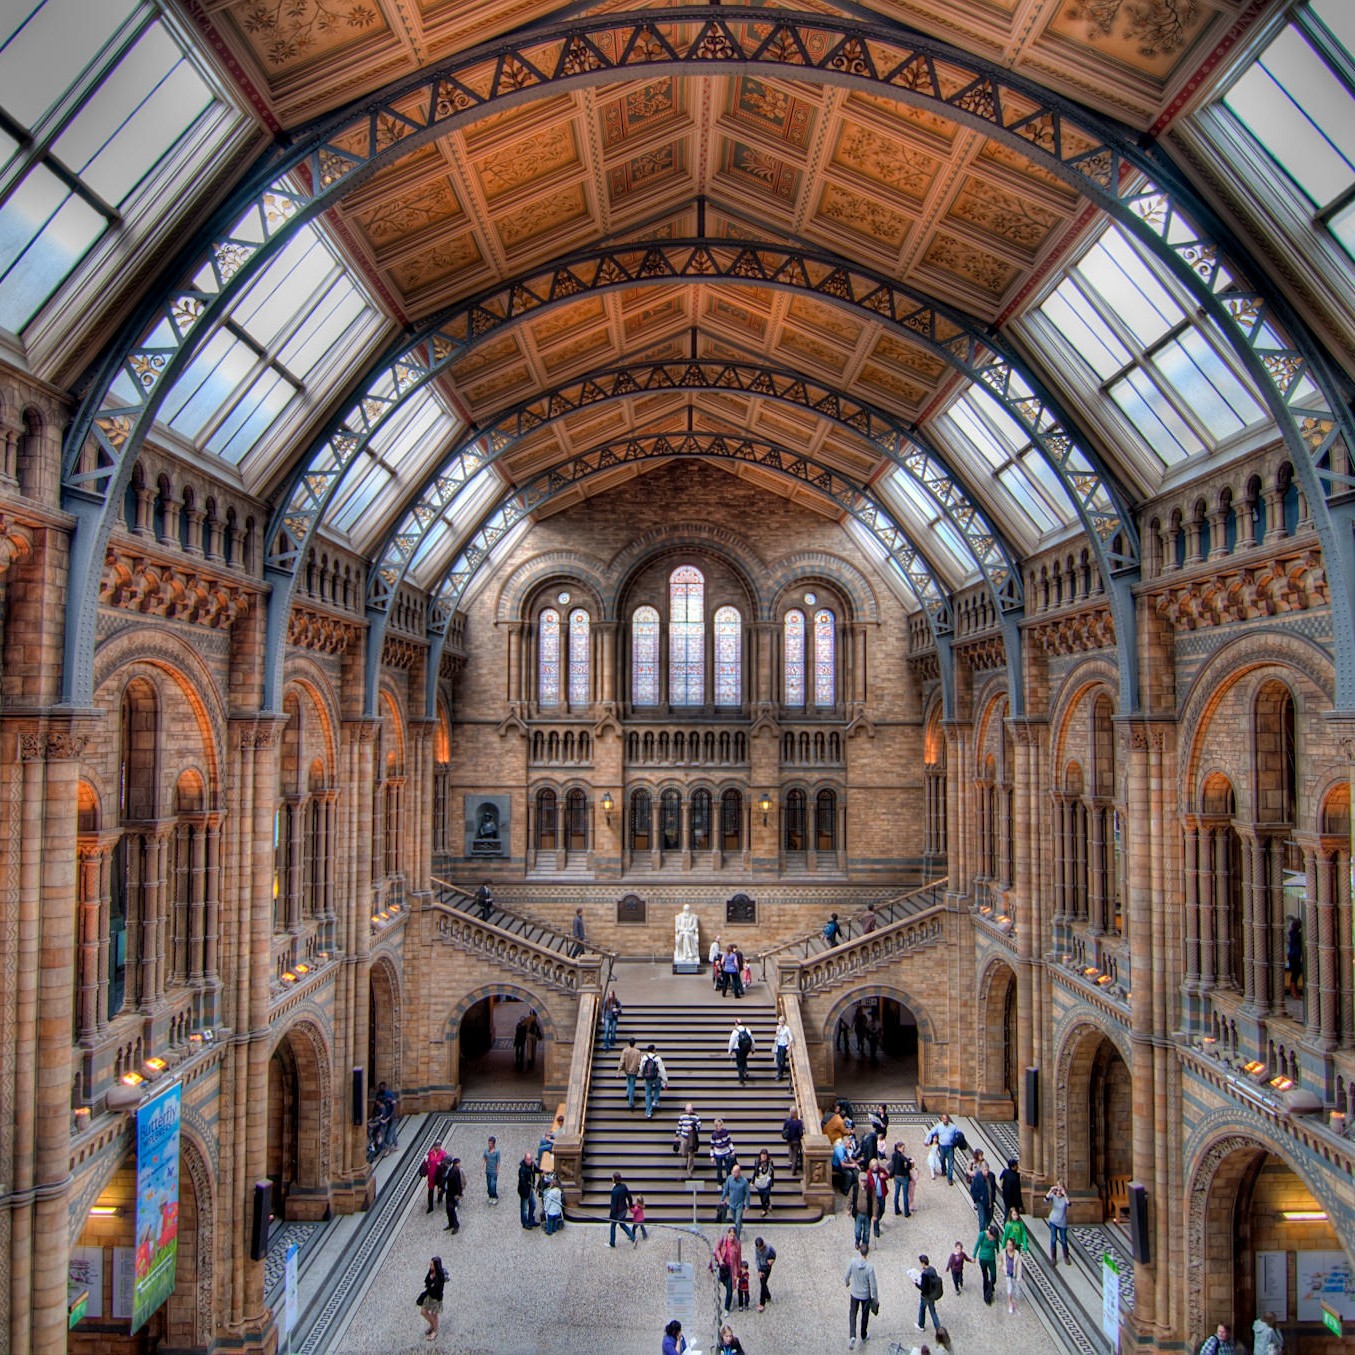 London Museum of Natural History